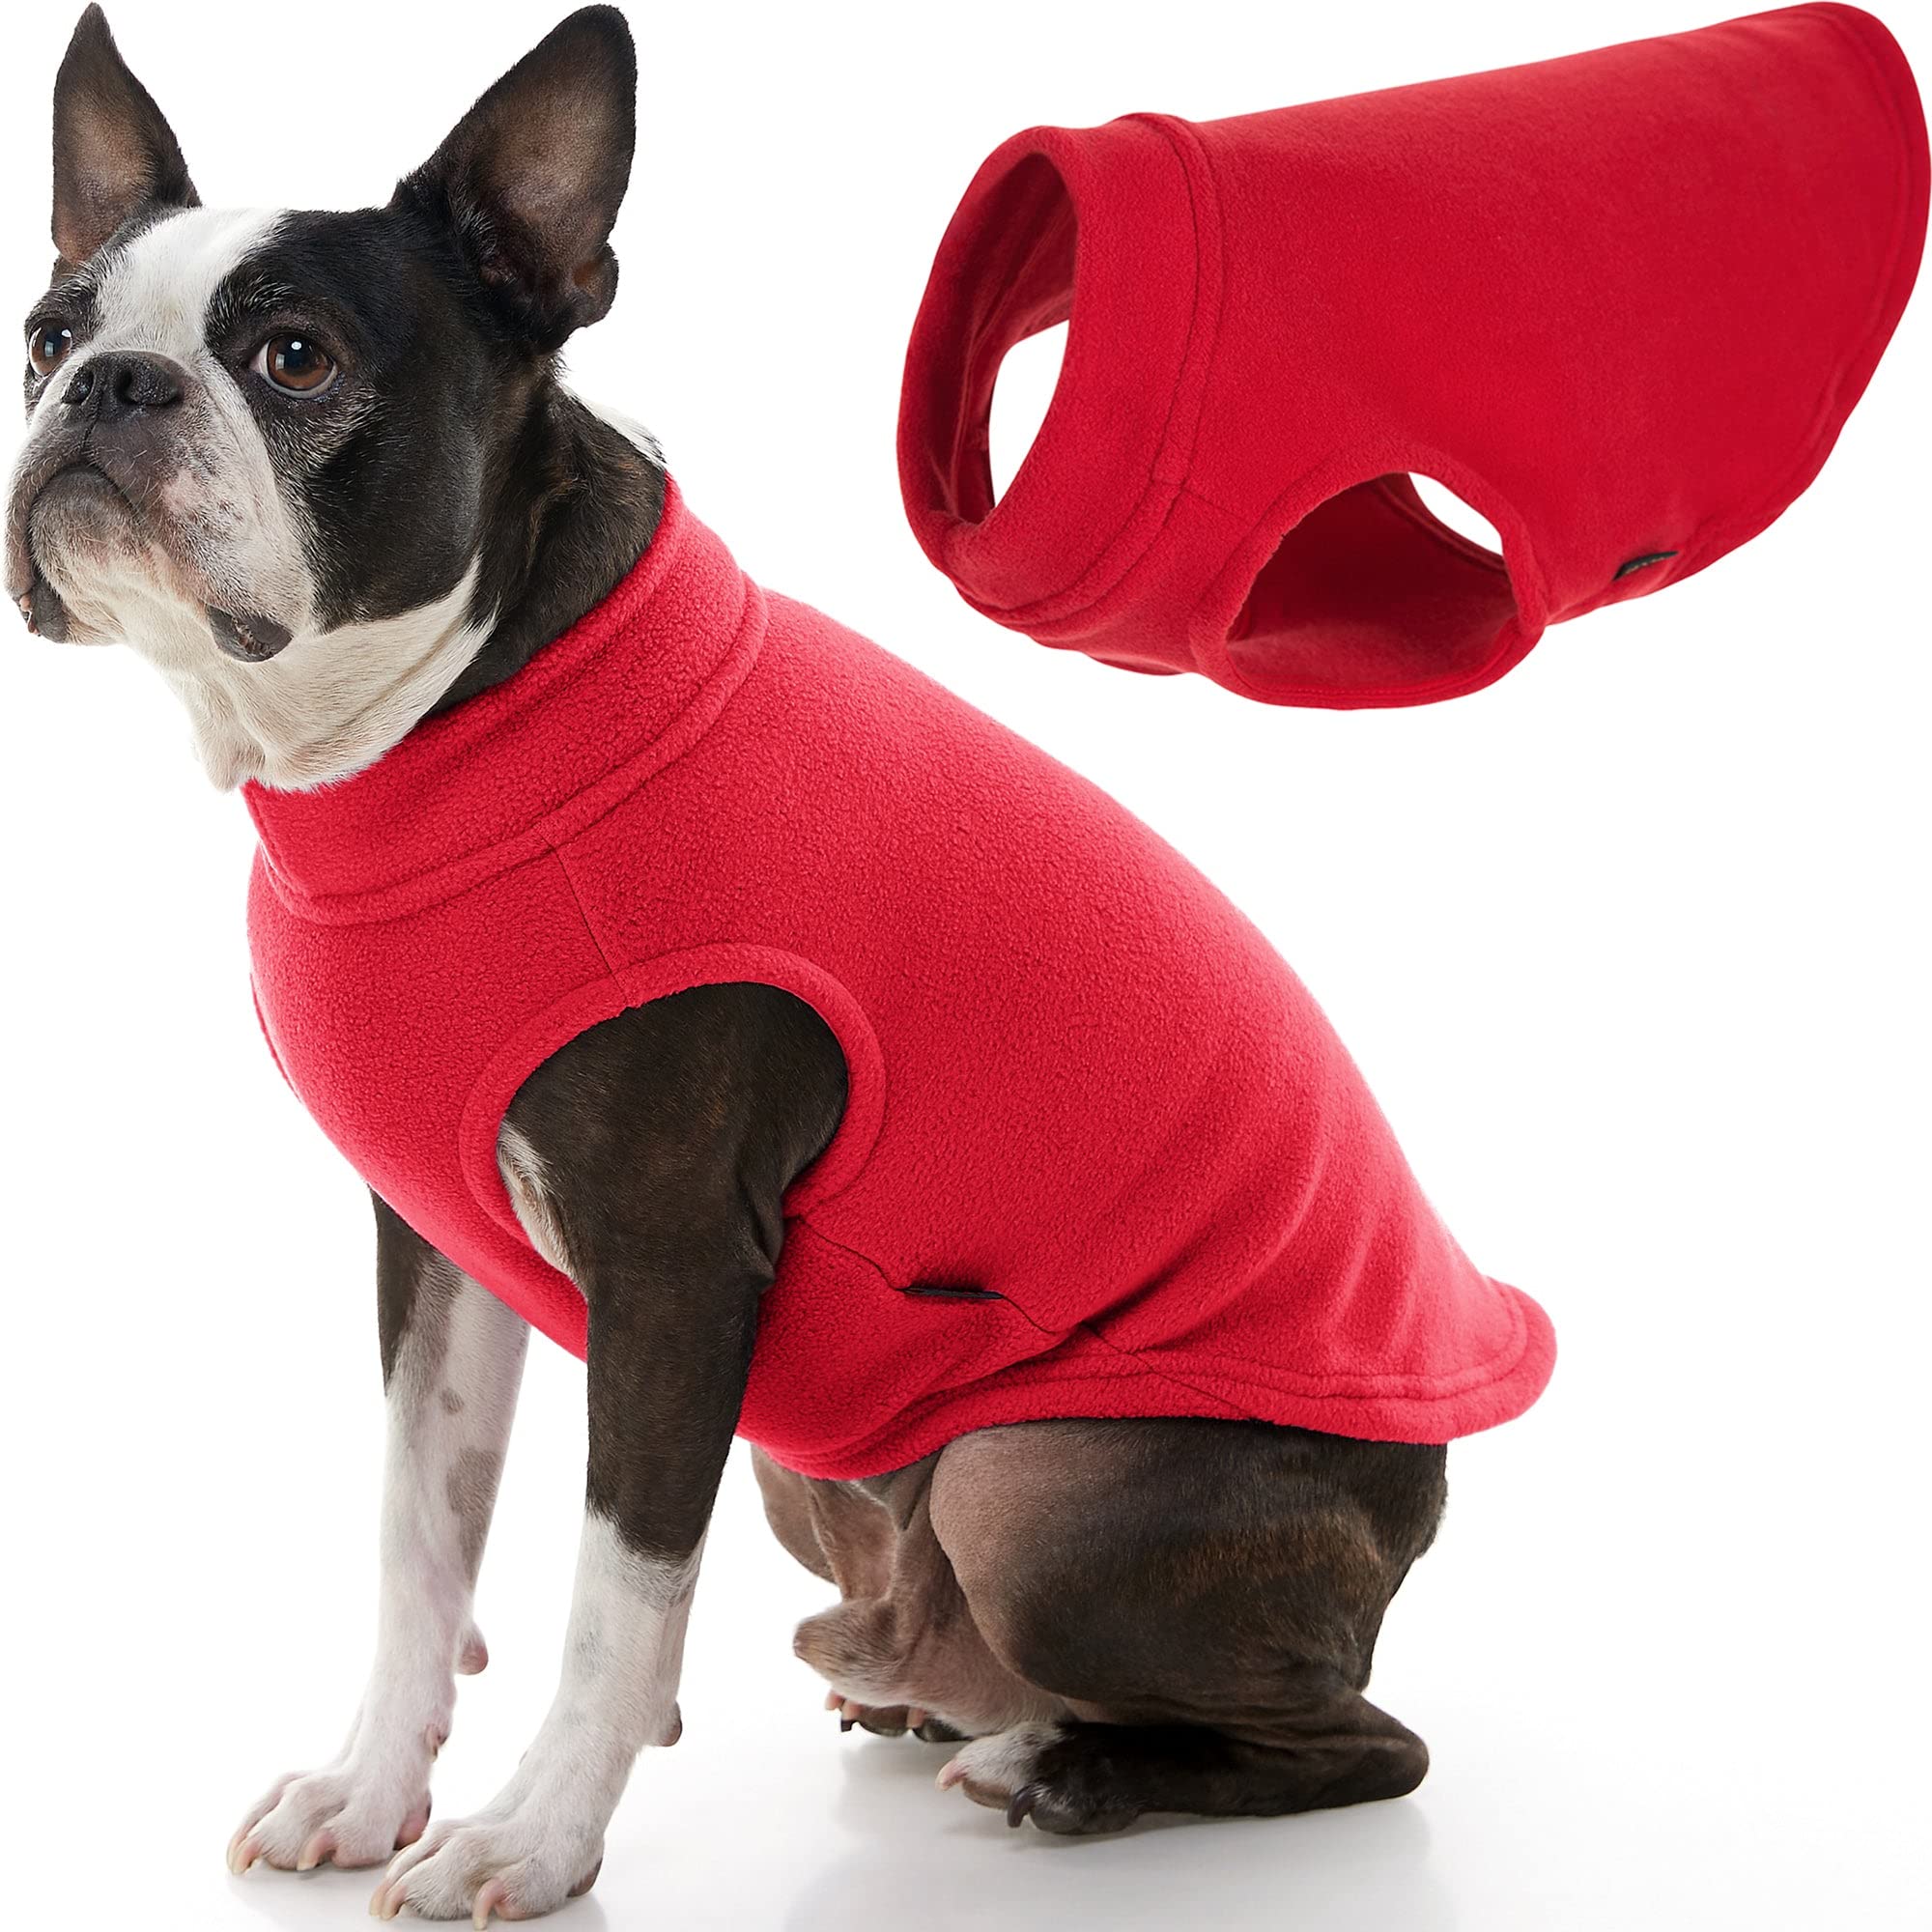 Gooby Stretch Fleece Vest Dog Sweater - Red, X-Large - Warm Pullover Fleece Dog Jacket - Winter Dog Clothes for Small Dogs Boy o